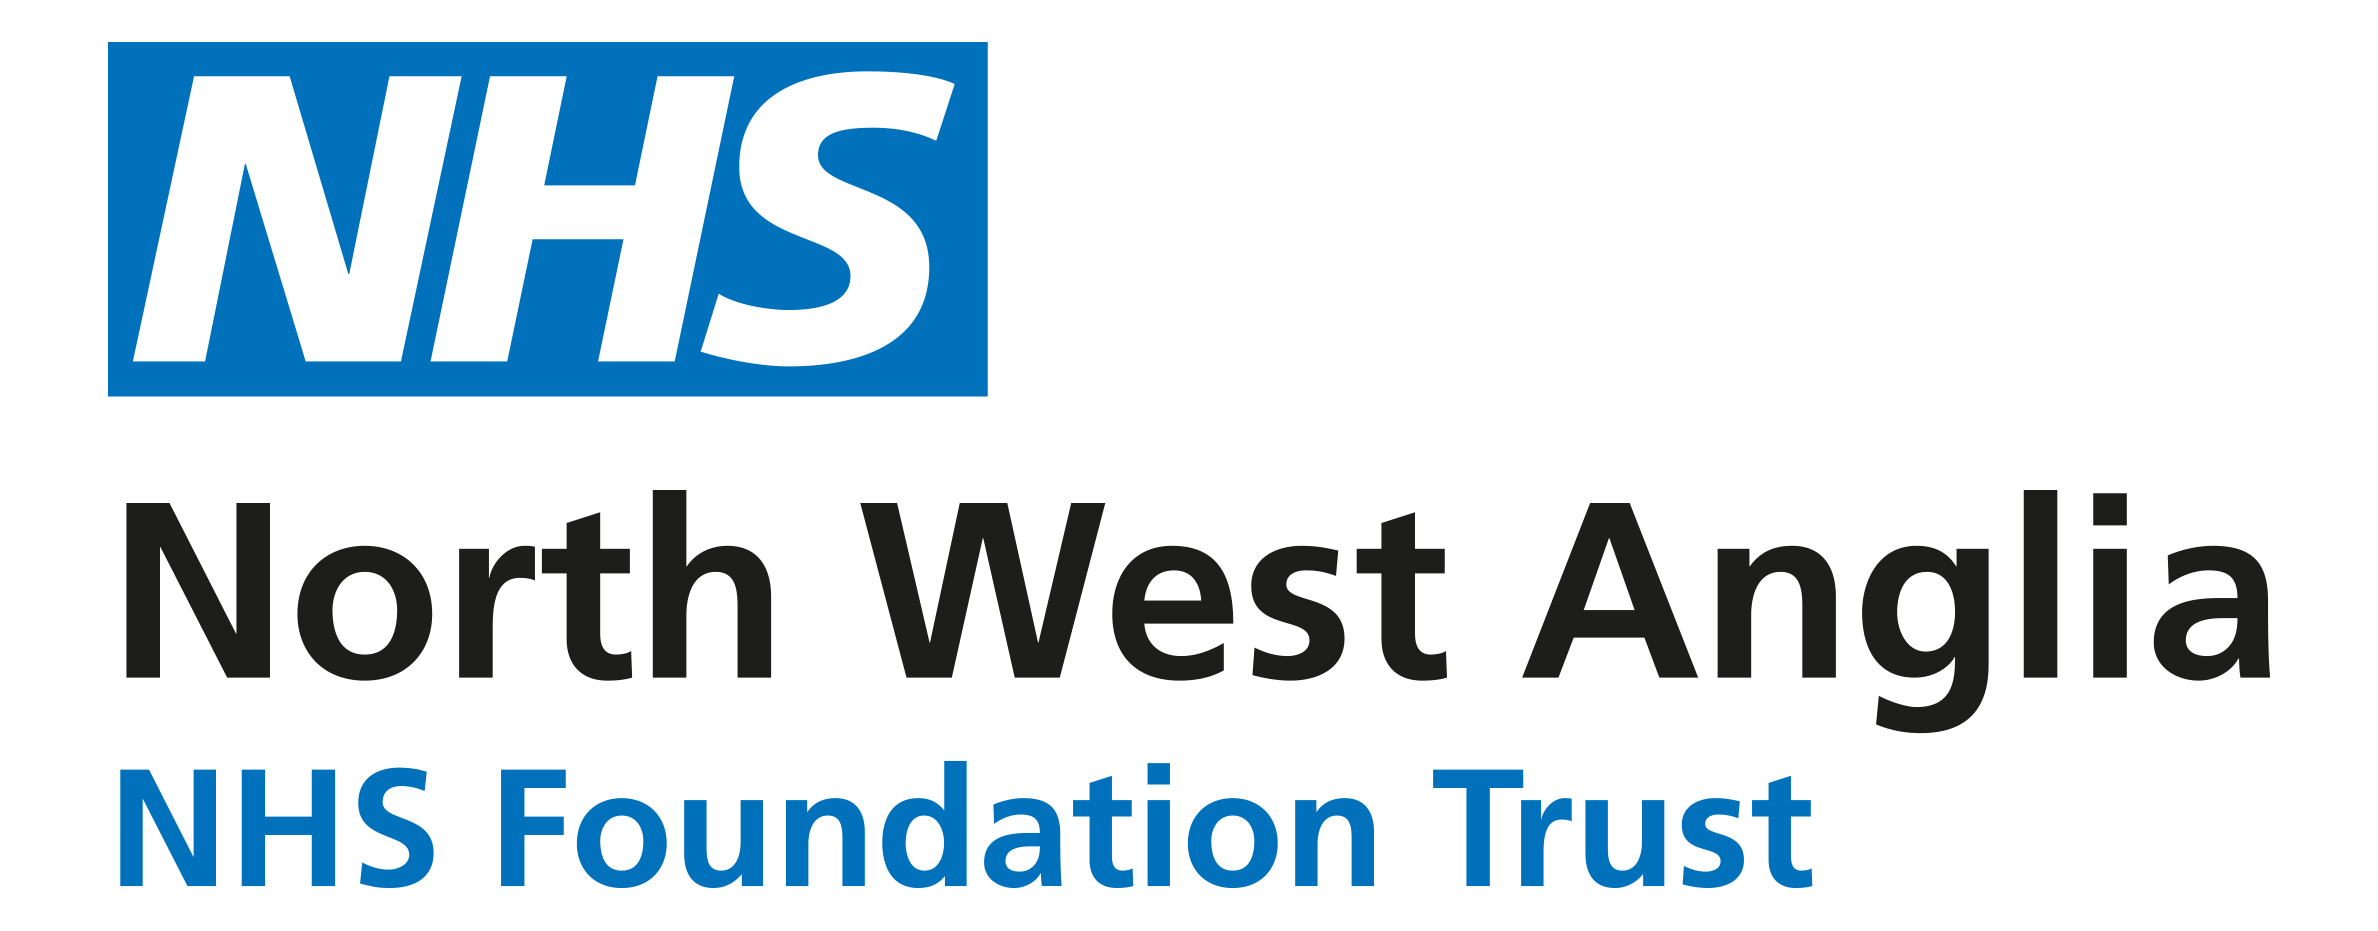 North West Anglia NHS Foundation Trust – Non-Executive Director